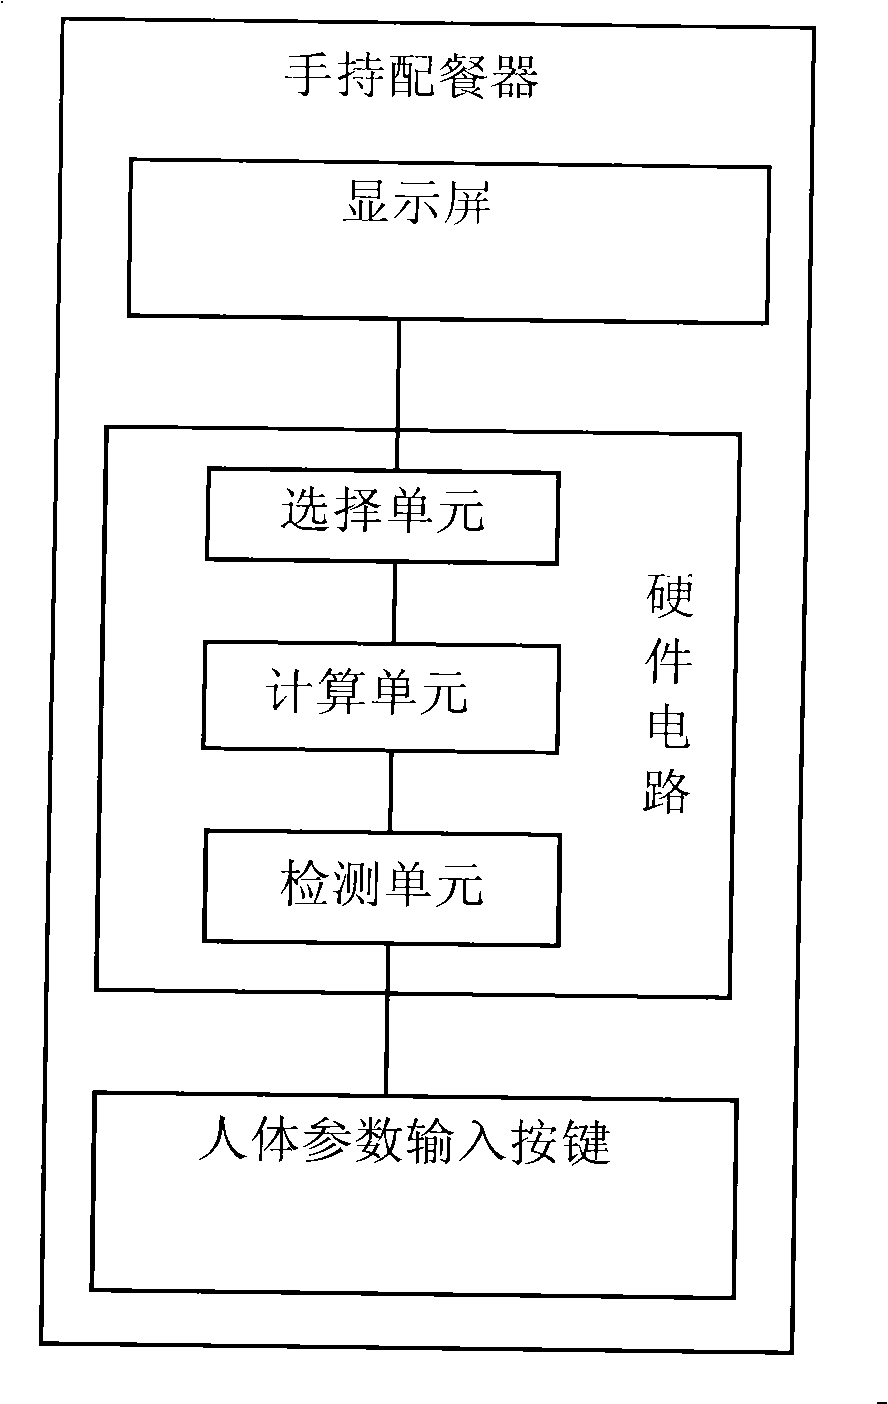 Nutrition meal-distributing system and implementing method thereof